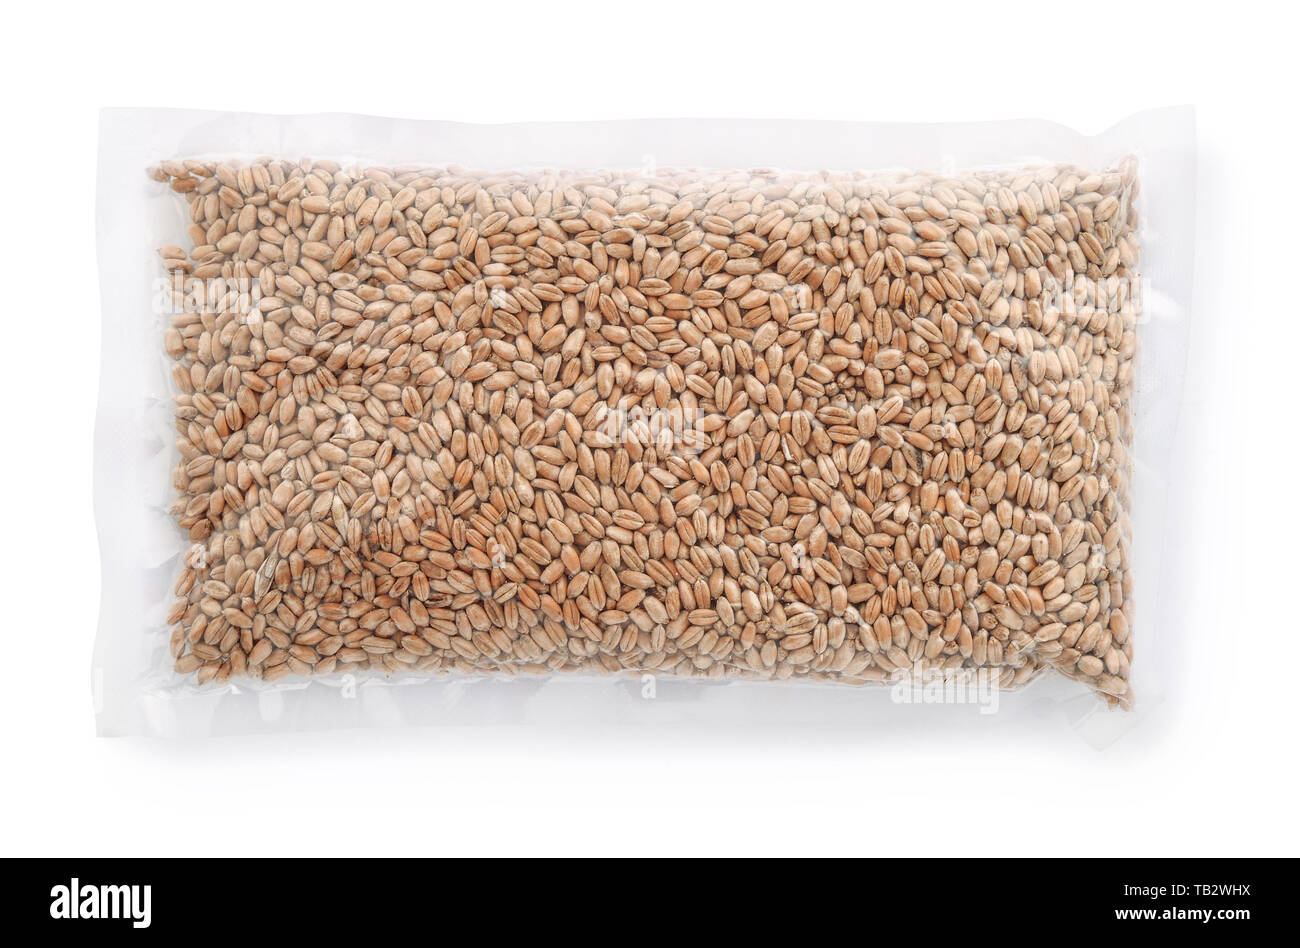 Top view of wheat grains in airtight clear plastic bag isolated on white Stock Photo